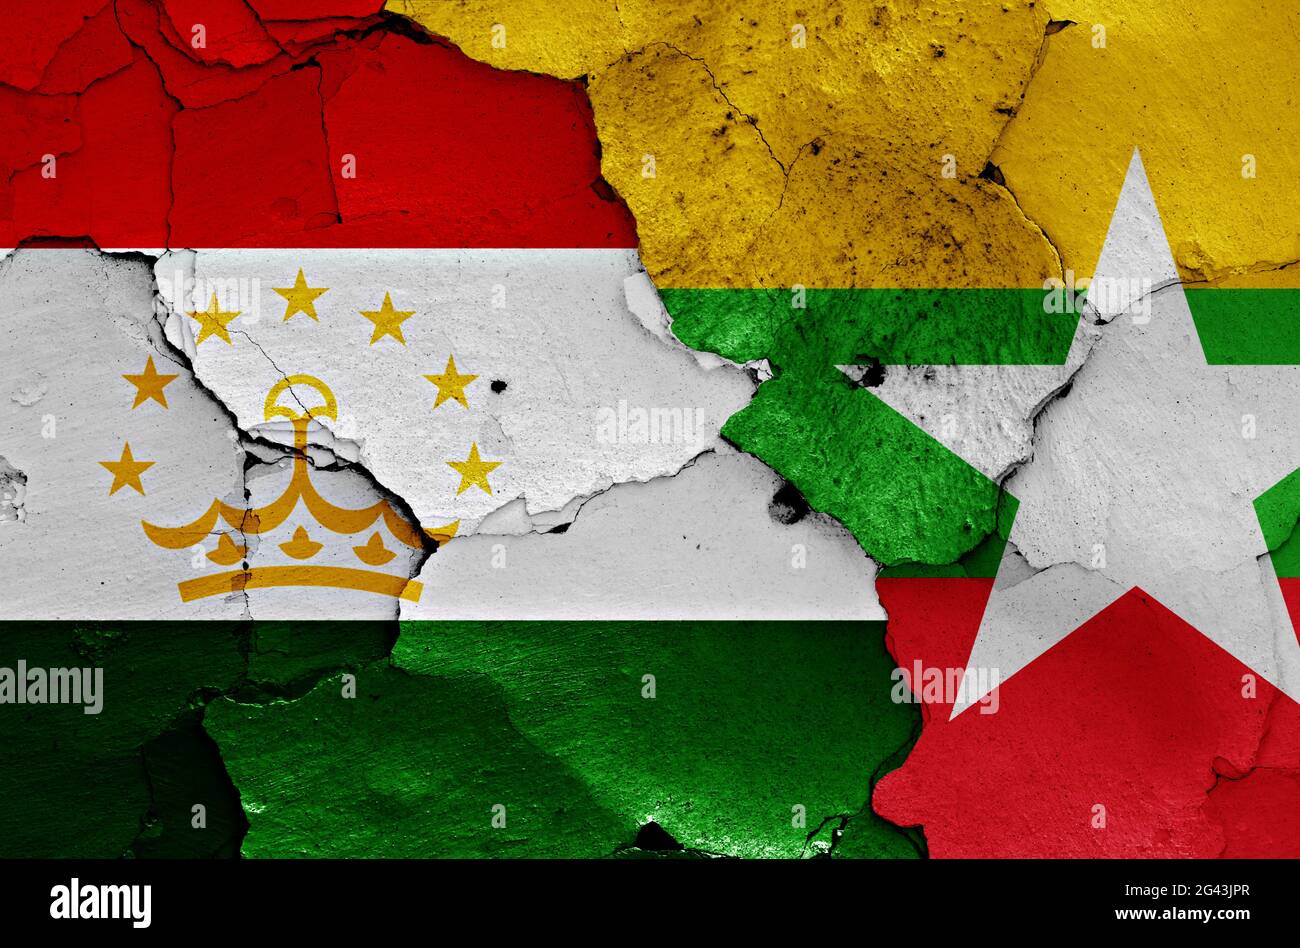 Flags of Tajikistan and Myanmar painted on cracked wall Stock Photo